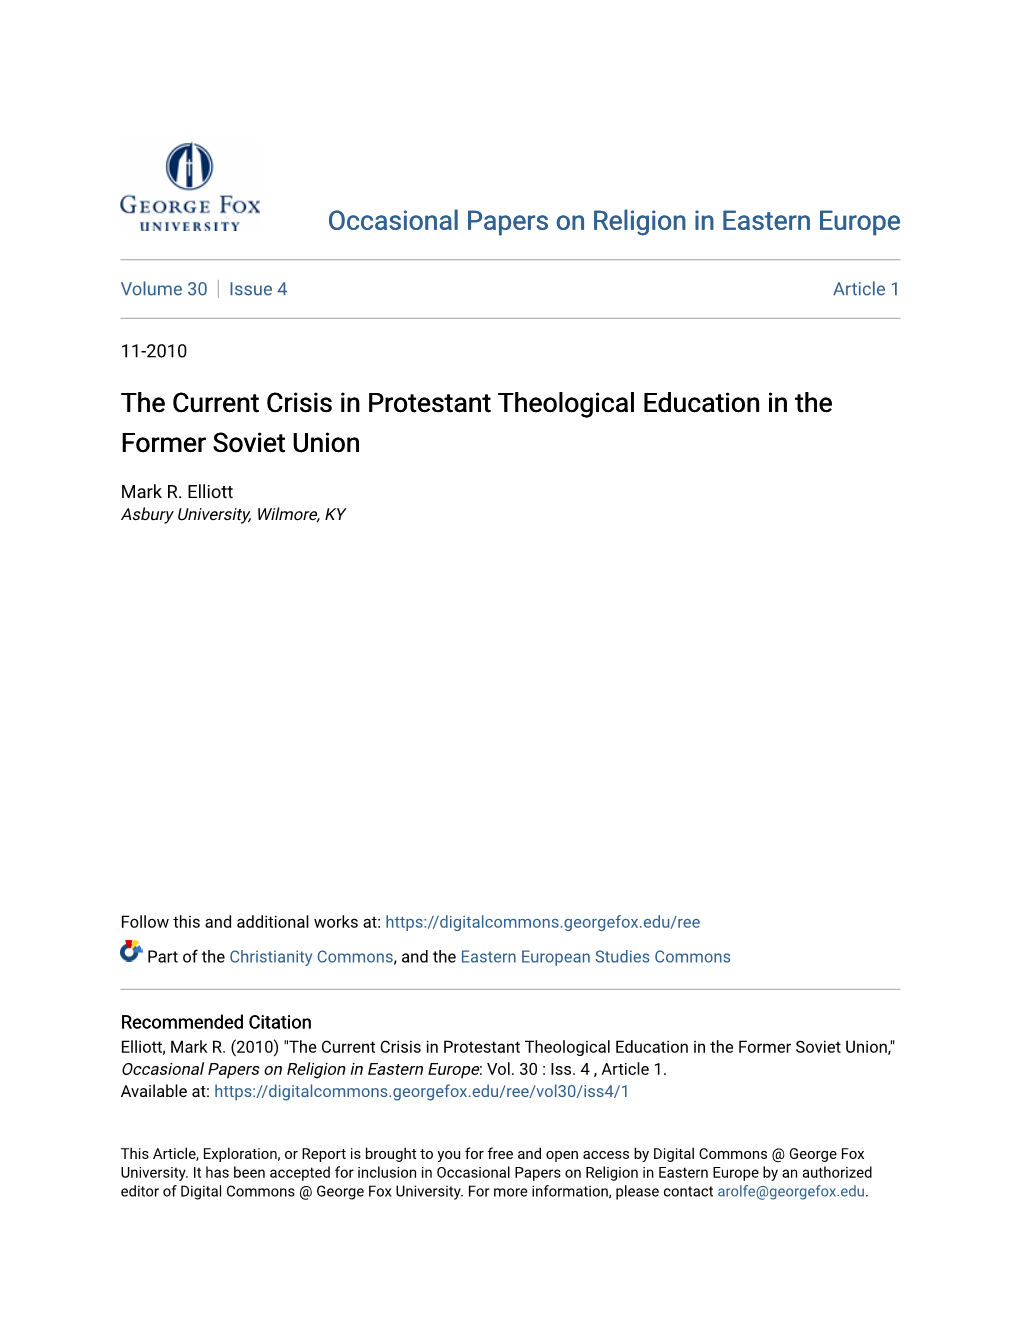 The Current Crisis in Protestant Theological Education in the Former Soviet Union